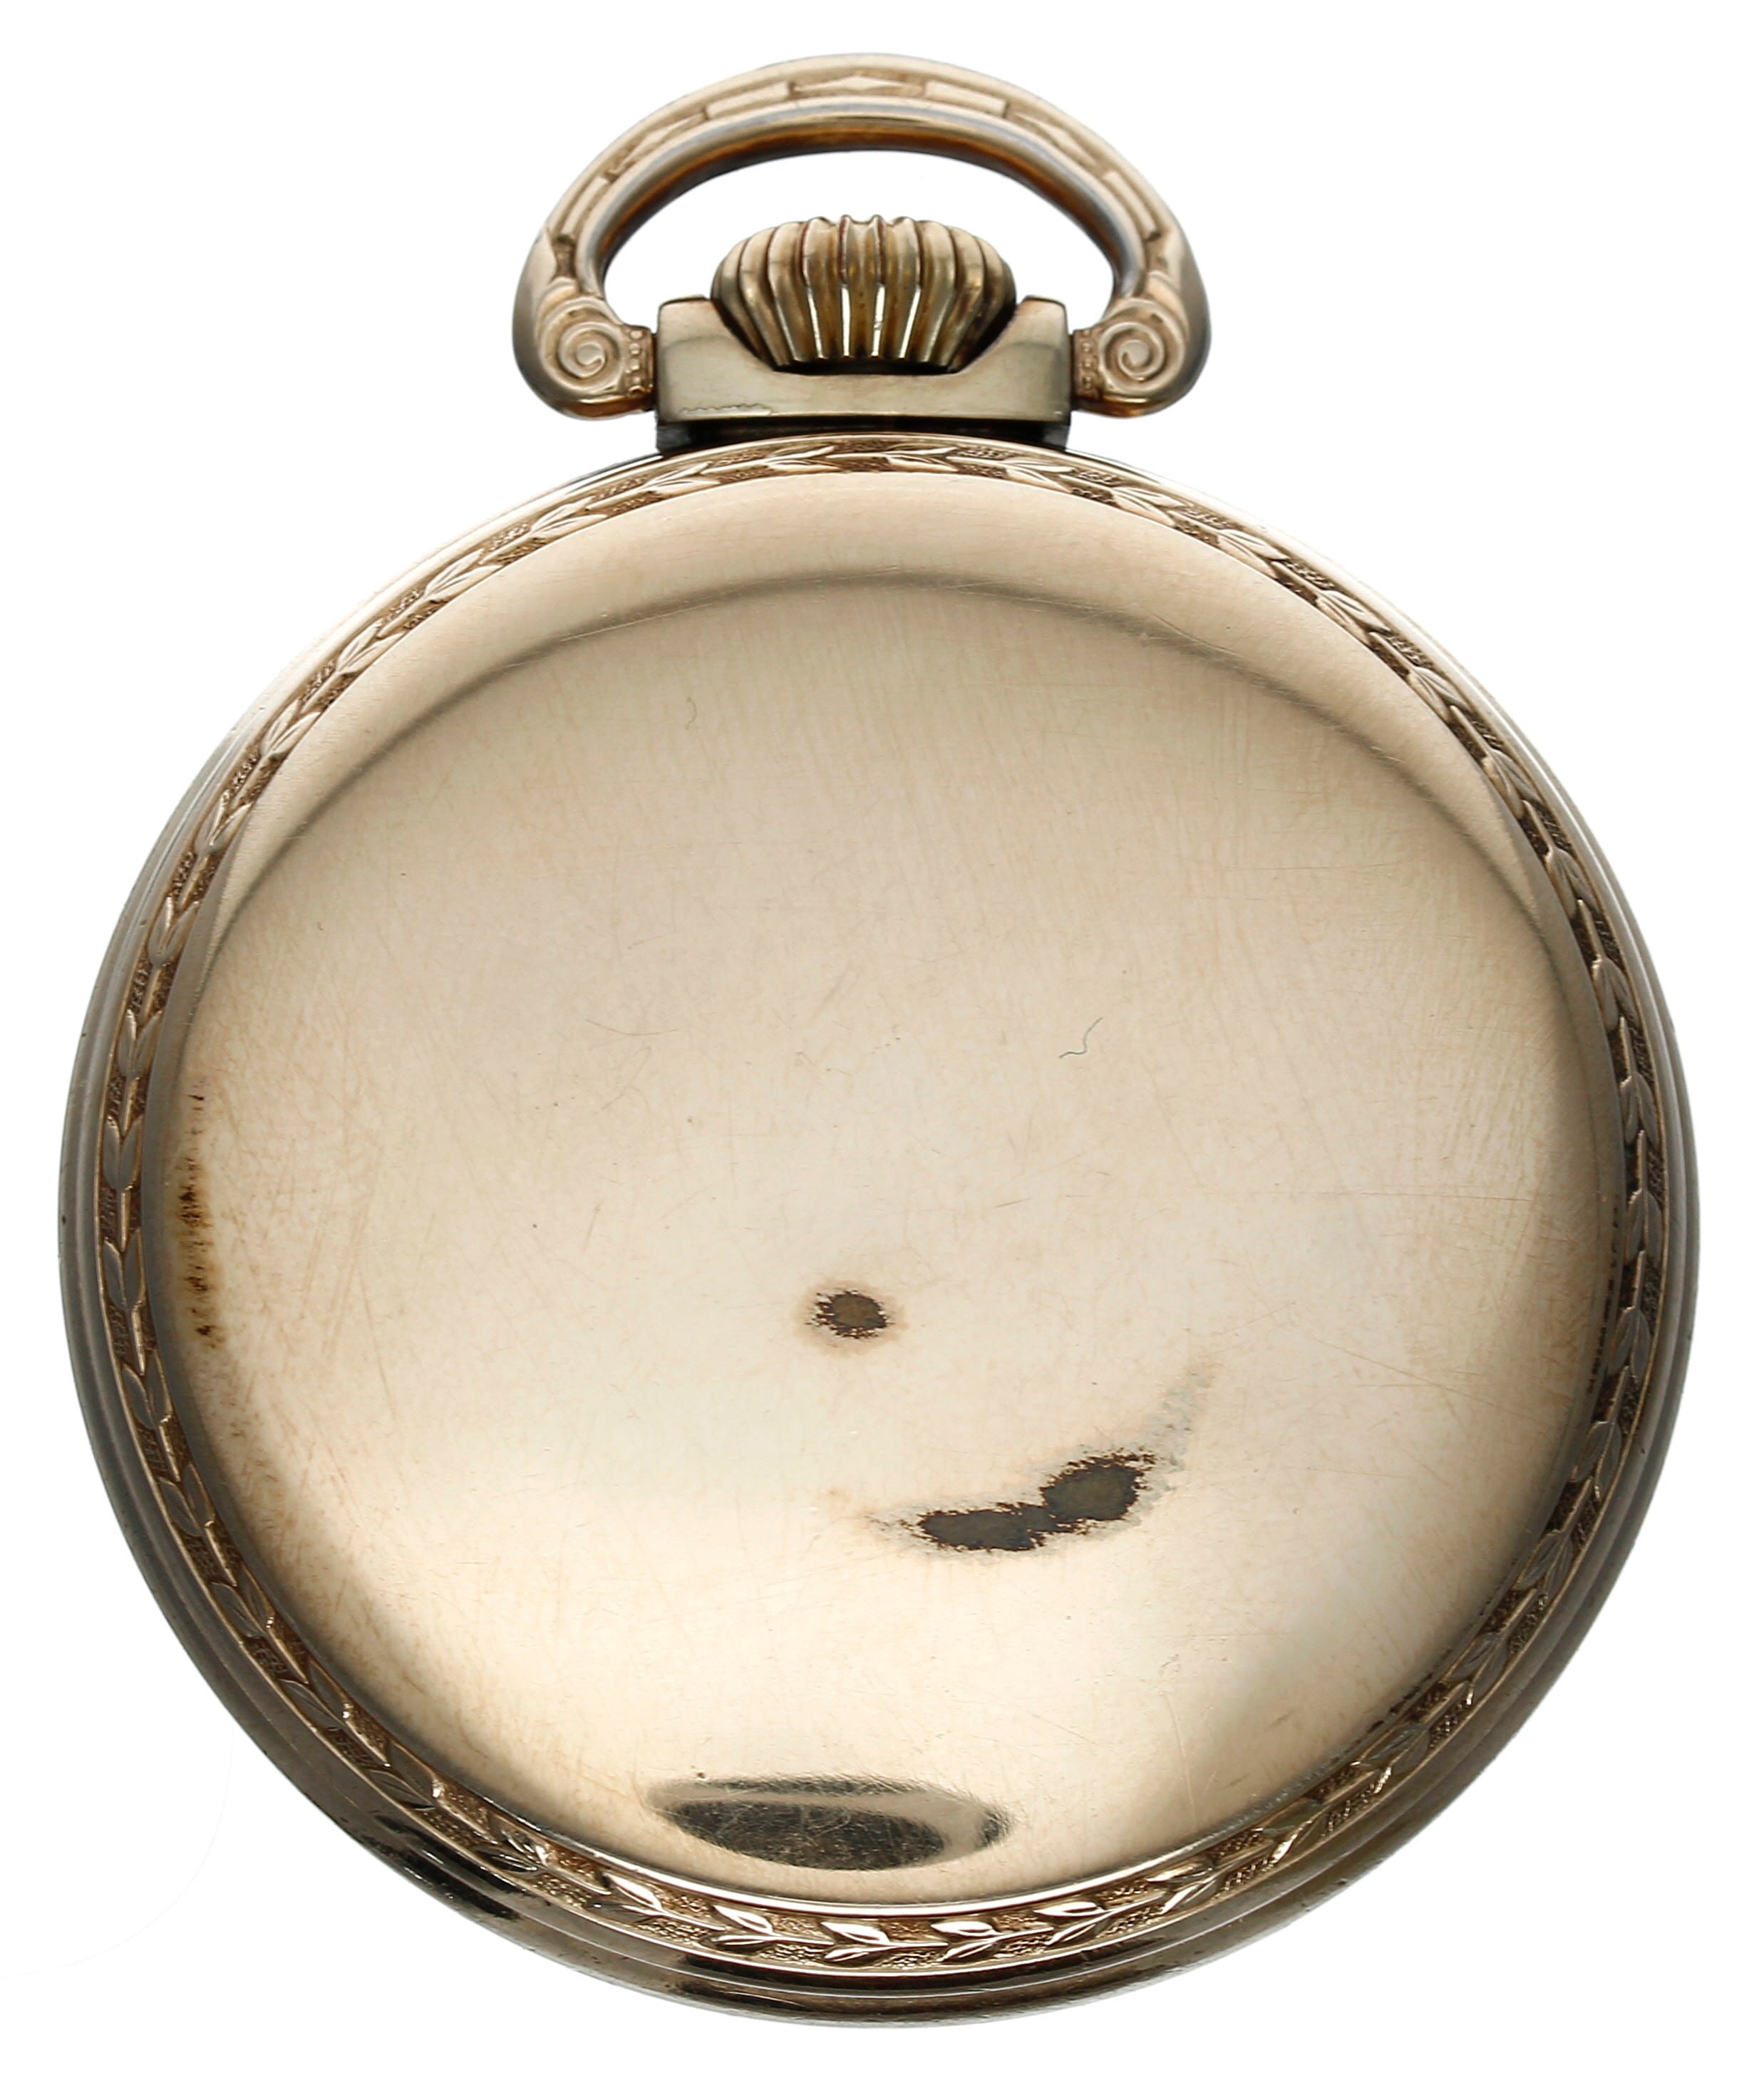 Illinois Watch Co. 'Bunn Special' 10k rolled gold lever set pocket watch, circa 1924, signed 21 - Image 4 of 4